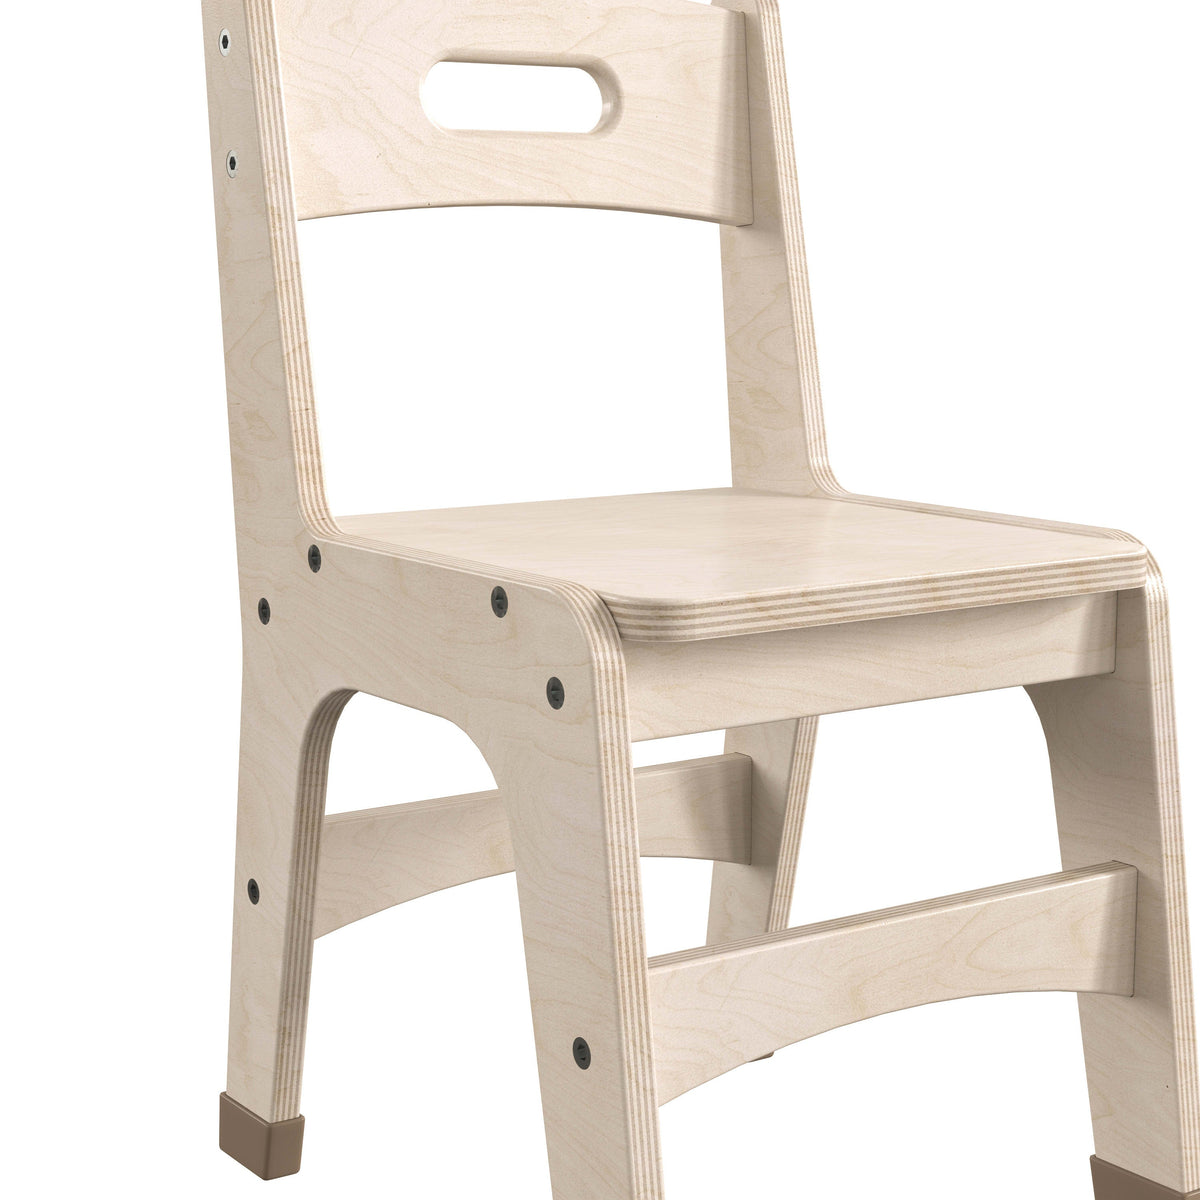 Commercial Grade 11.5inch Natural Wood Classroom Chairs with Carry Handle-2 Pack